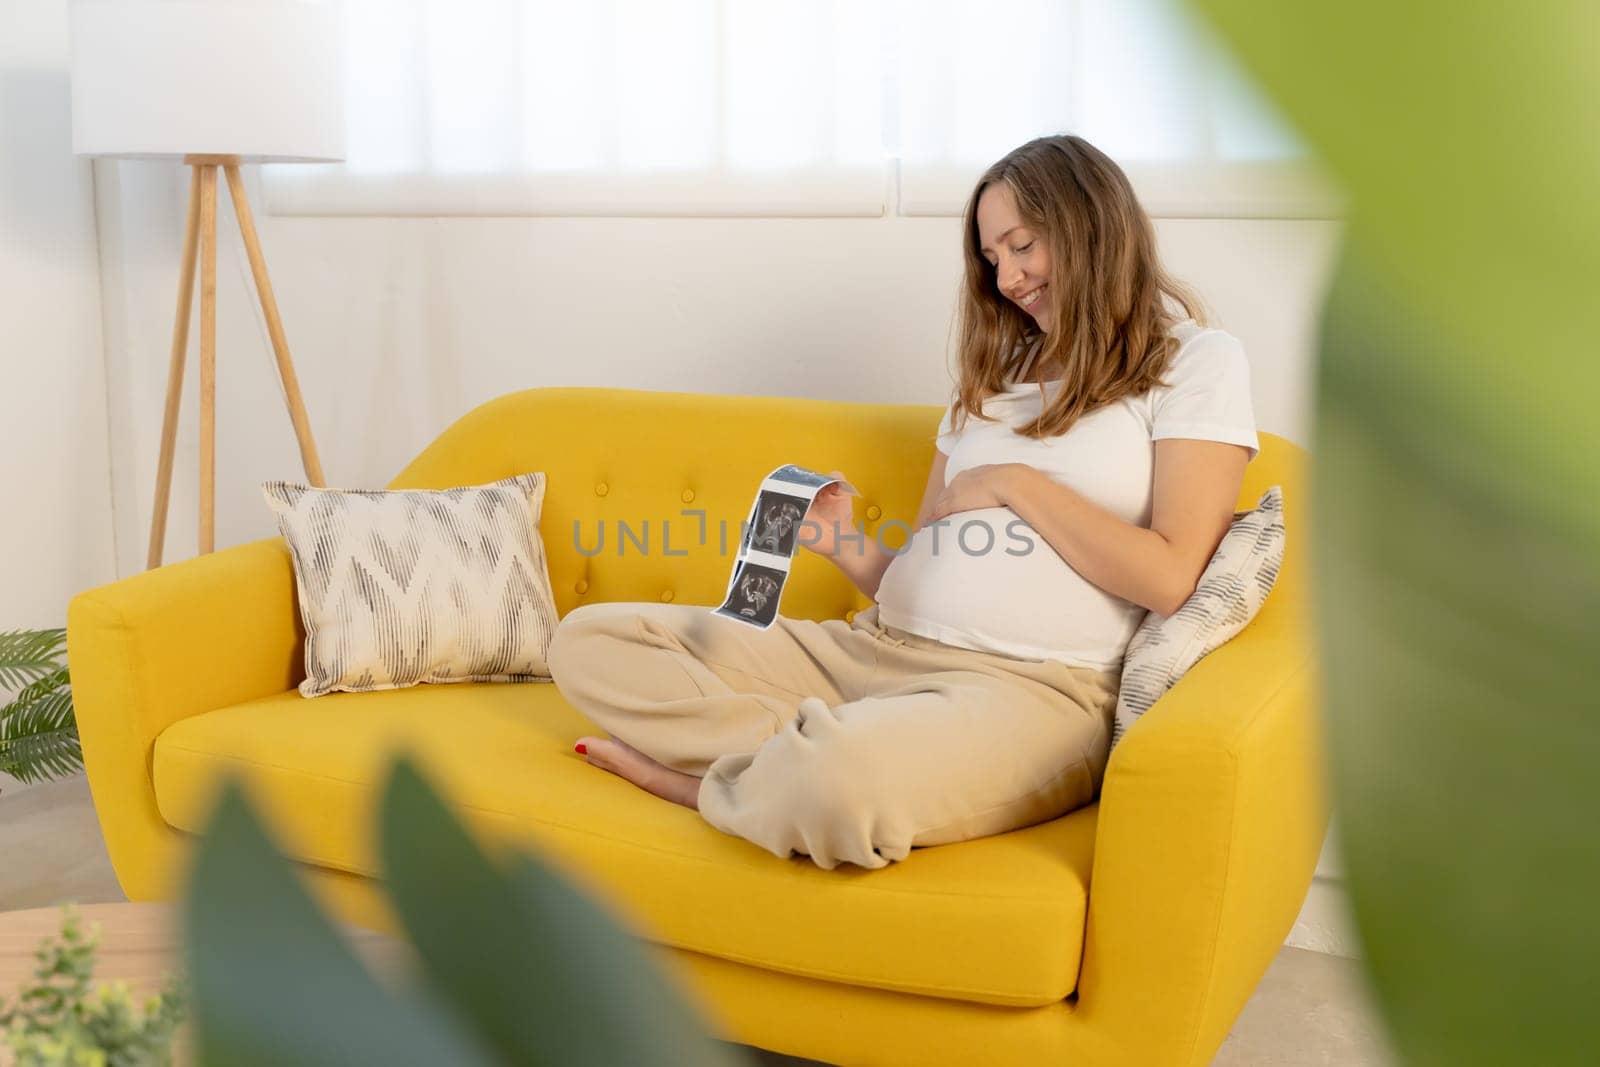 Pregnancy mother looking picture of ultrasound film and touching her abdomen. Woman checking baby result sitting relaxed and rest on sofa in living room at home. High quality photo